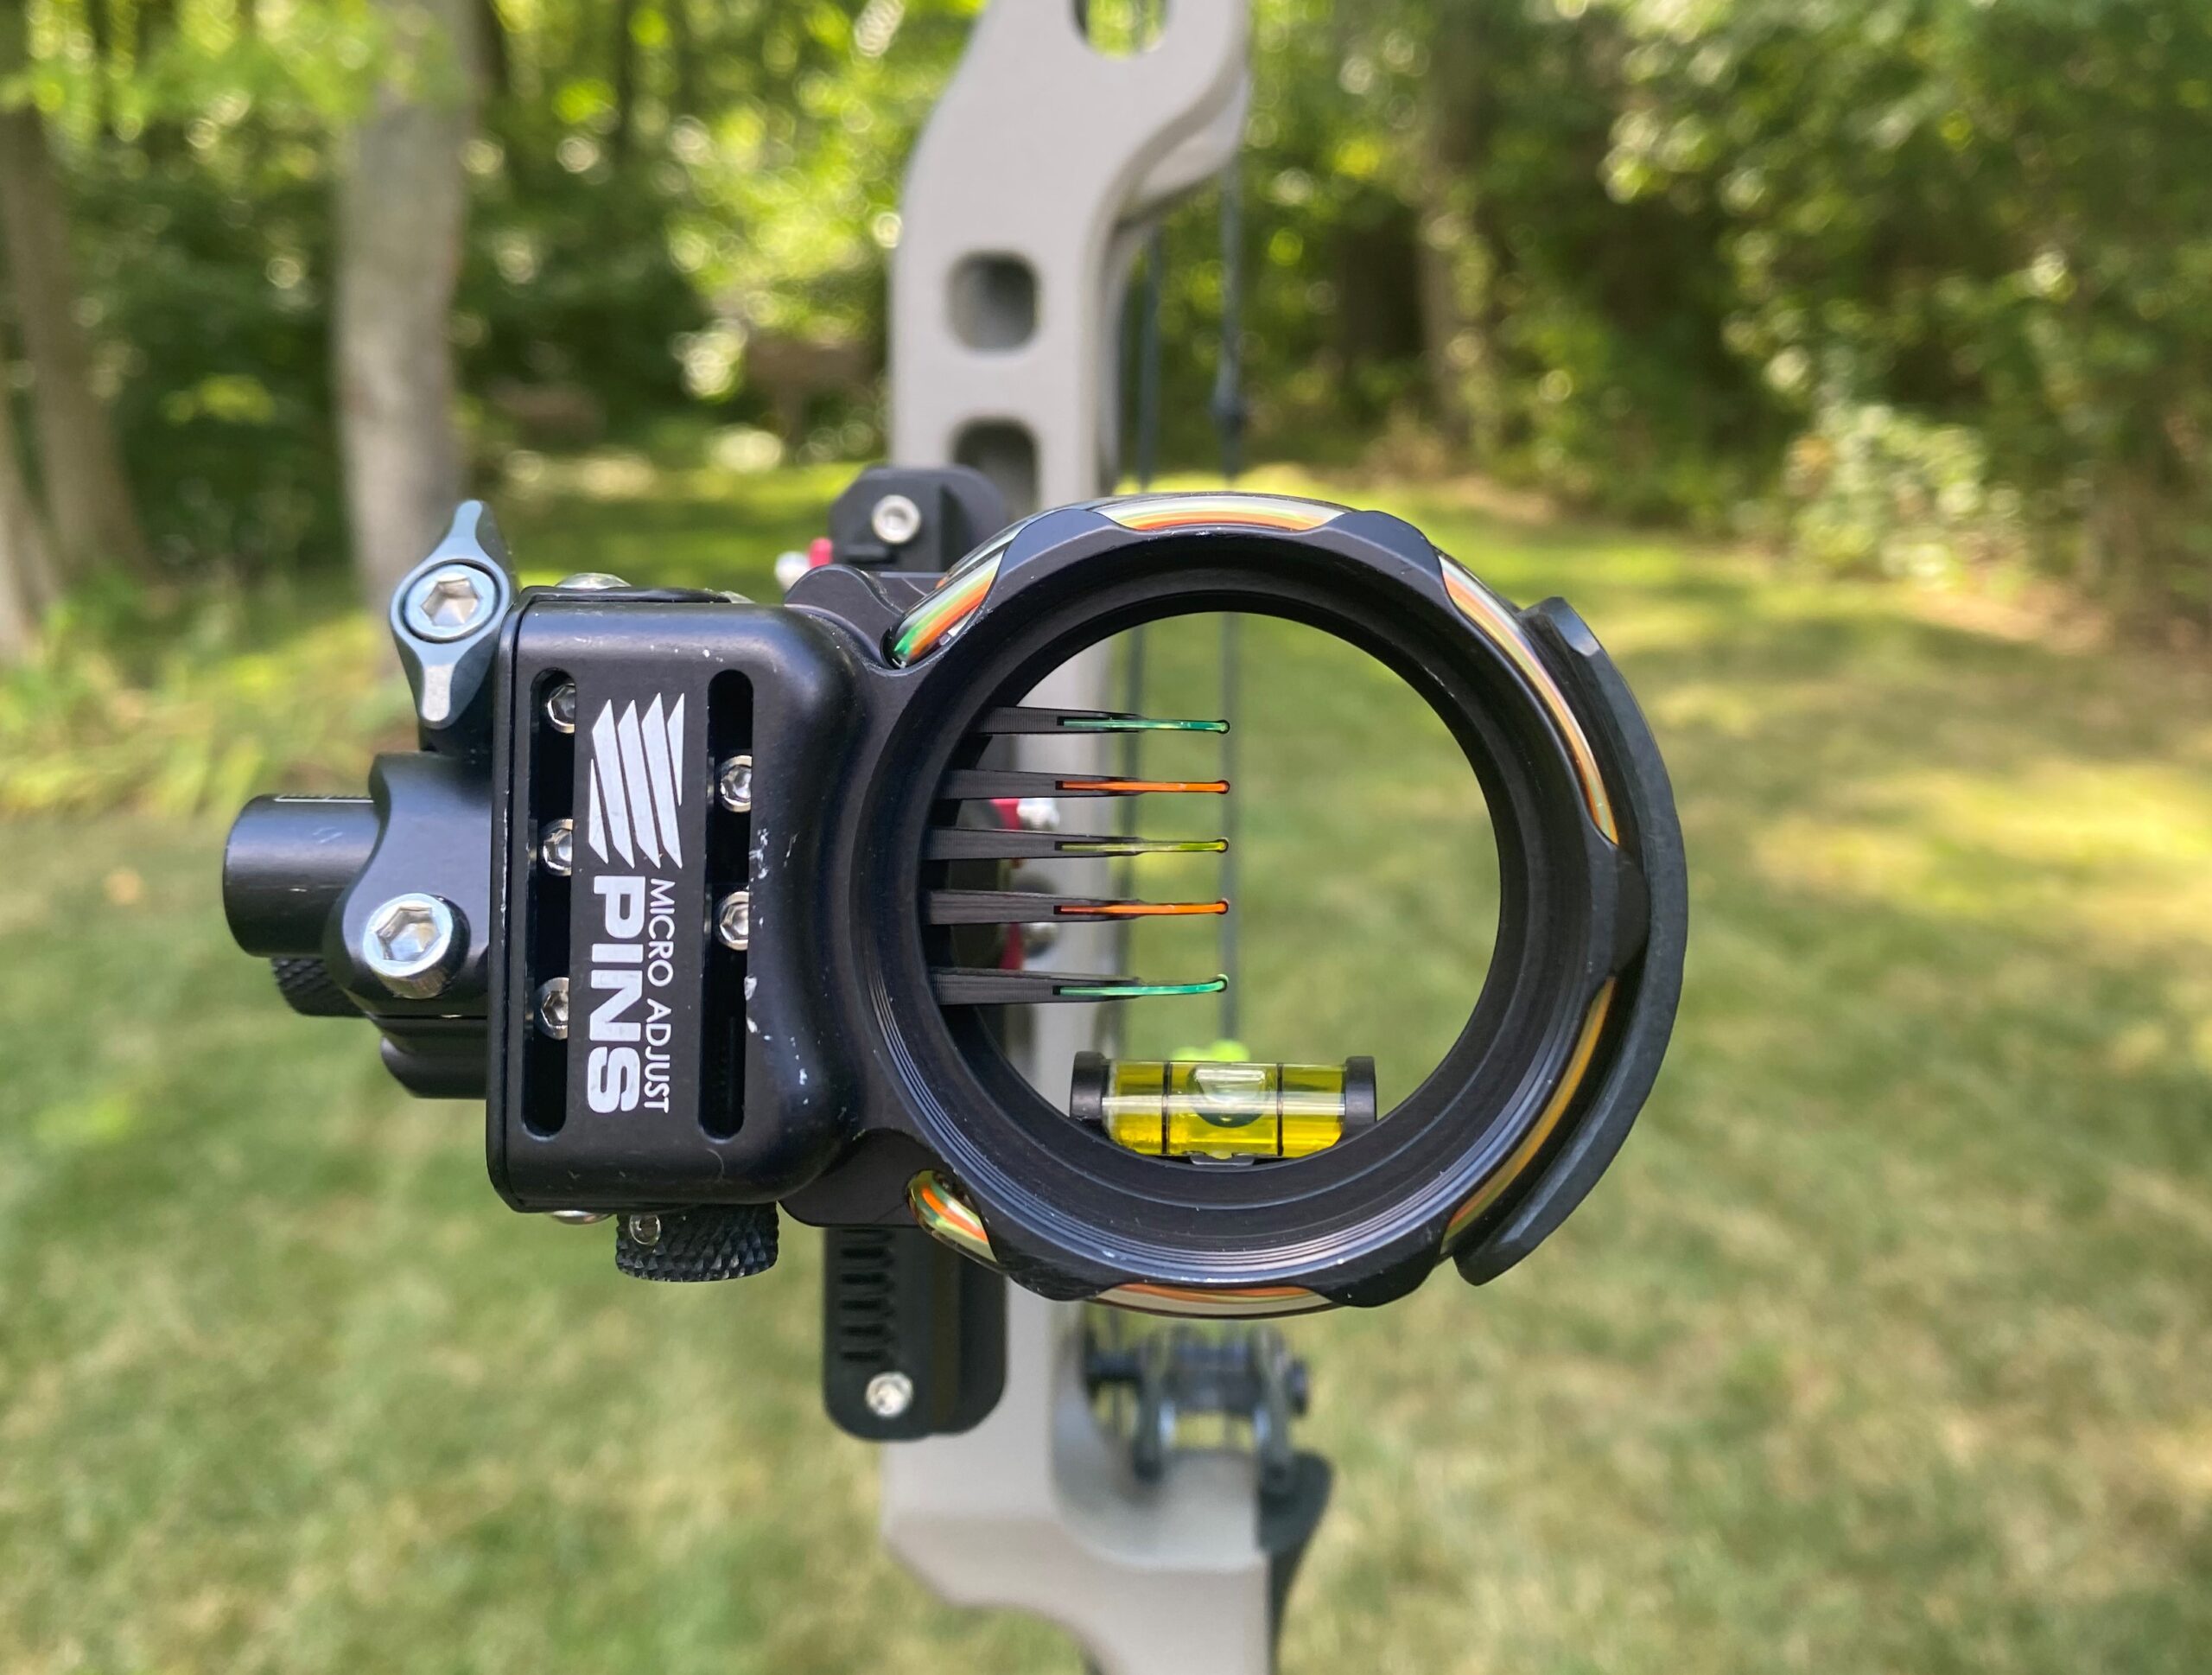 The Axcel Landslyde is a refined slider sight for bowhunters